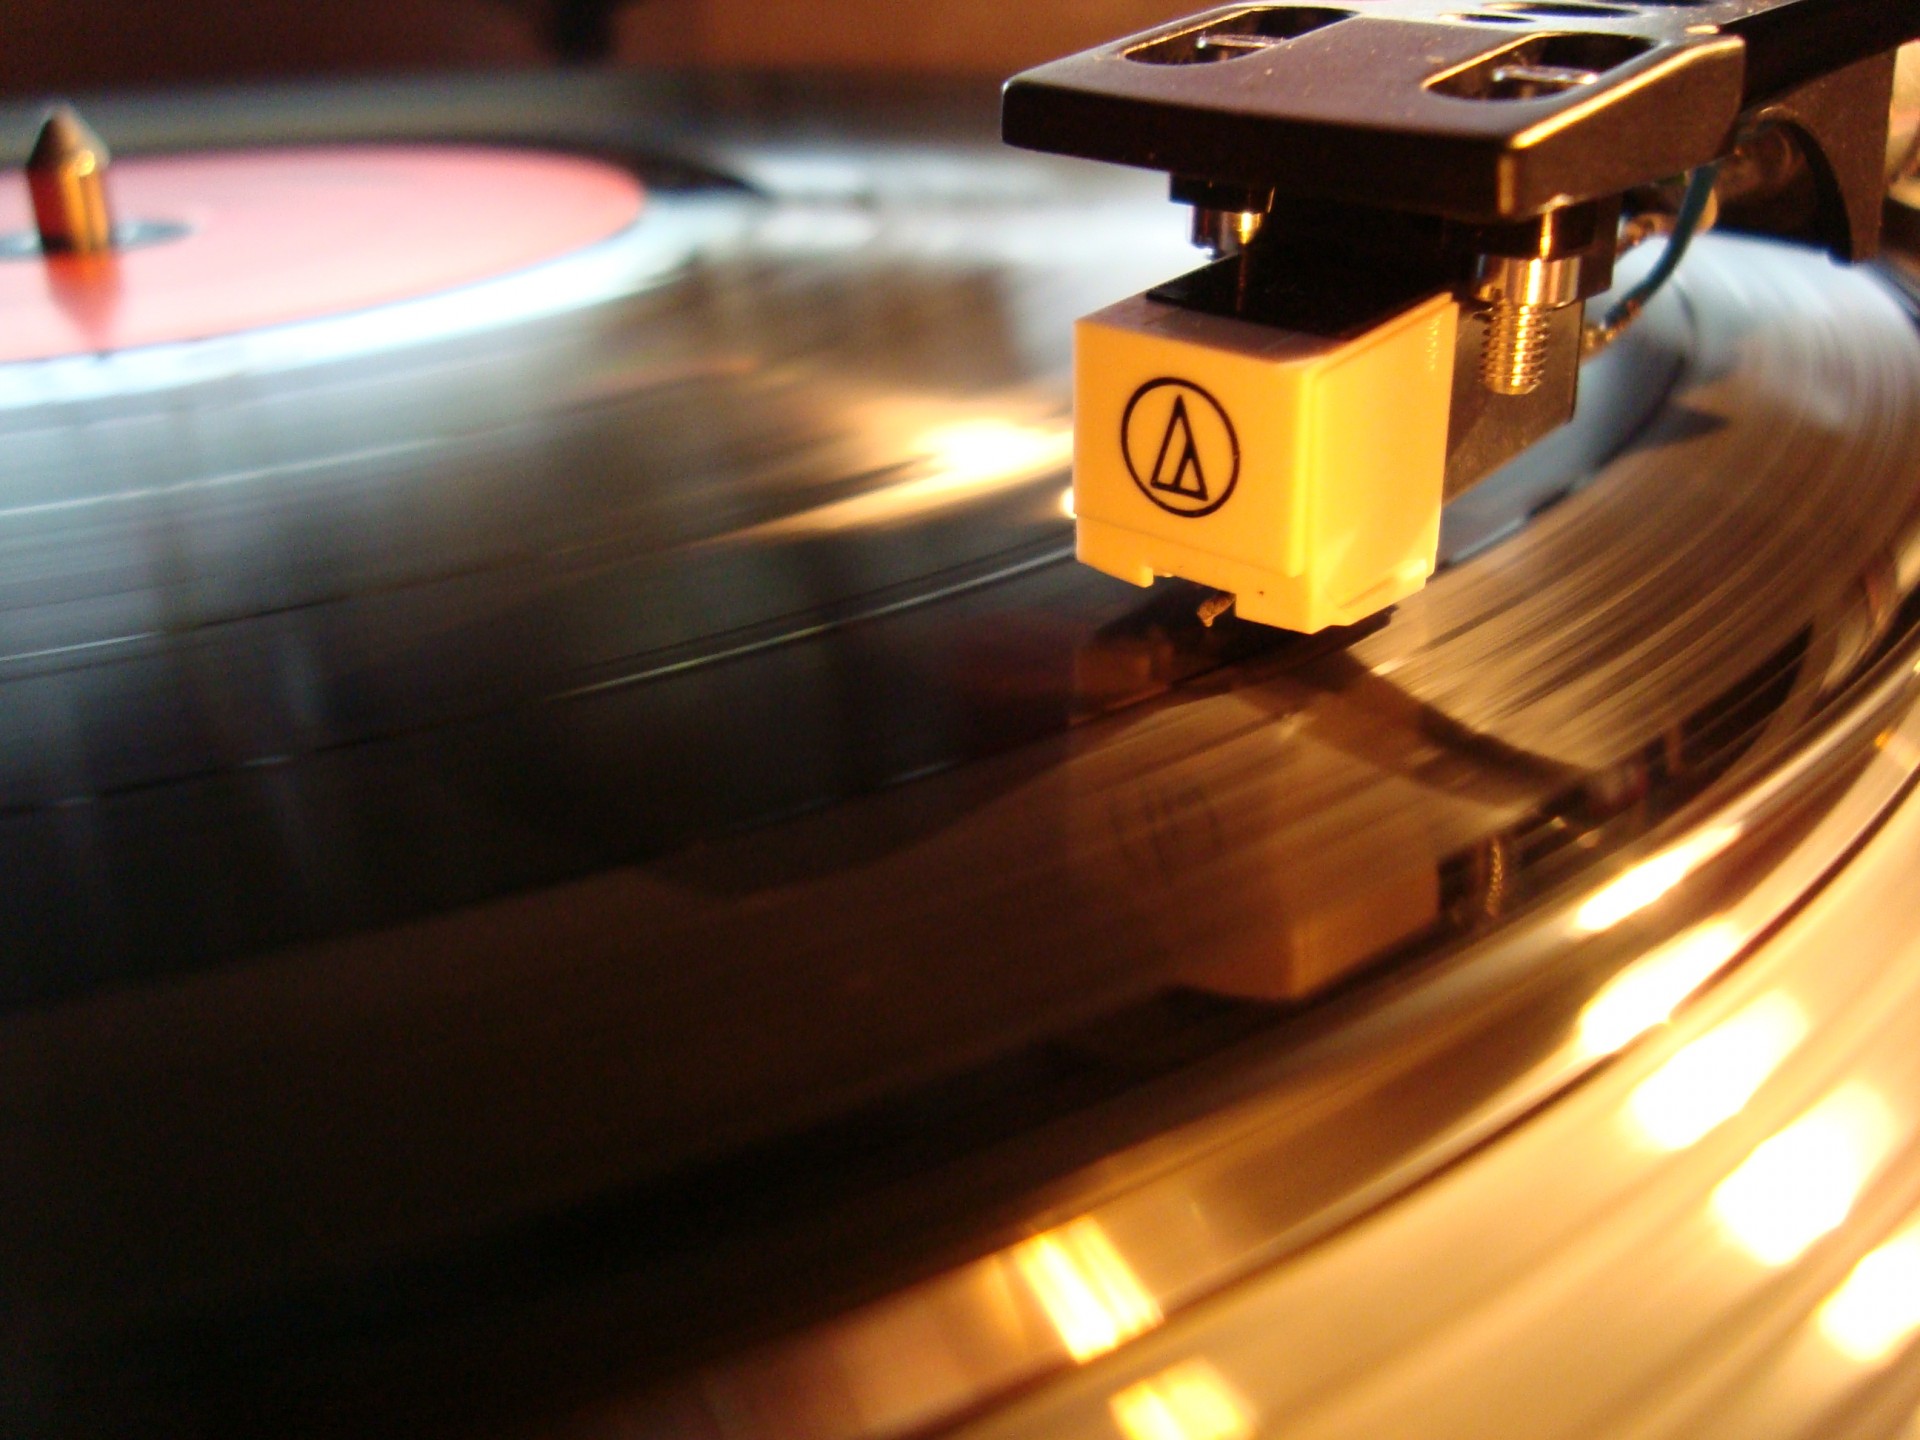 Needle of a record player / turntable